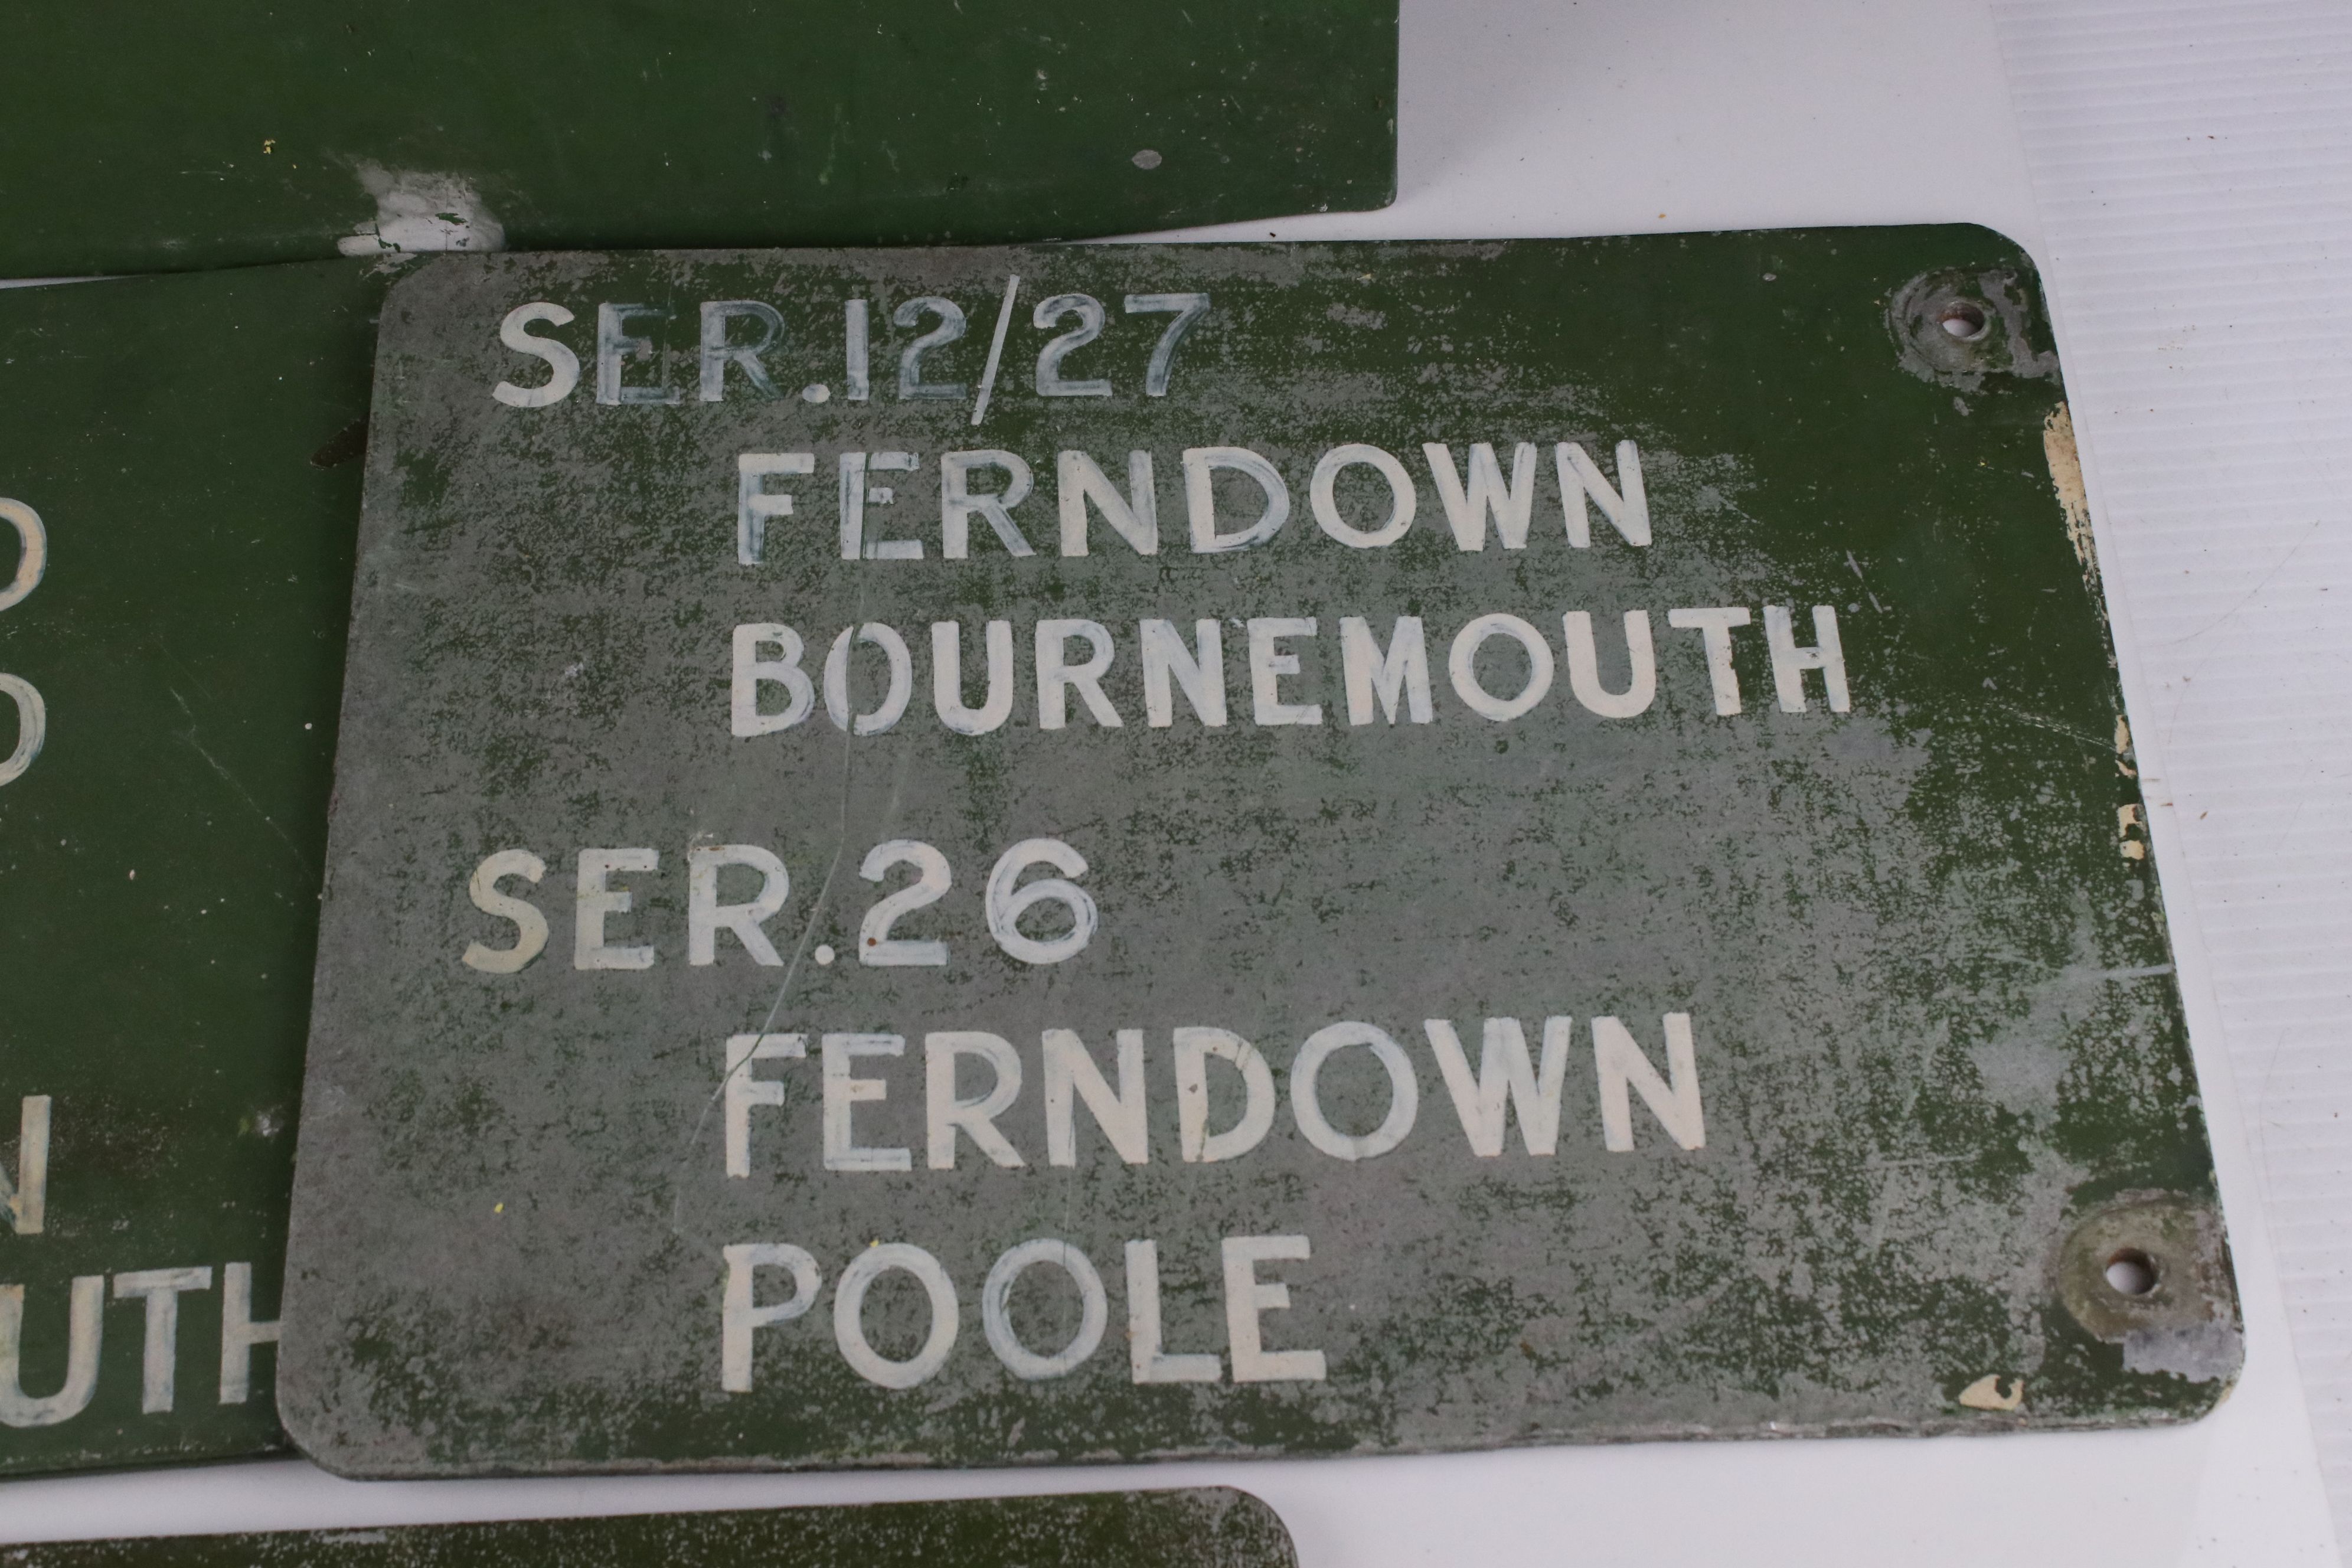 Three Mid 20th century Double Sided Metal Bus Service Signs covering Ferndown, Bournemouth, - Image 3 of 9